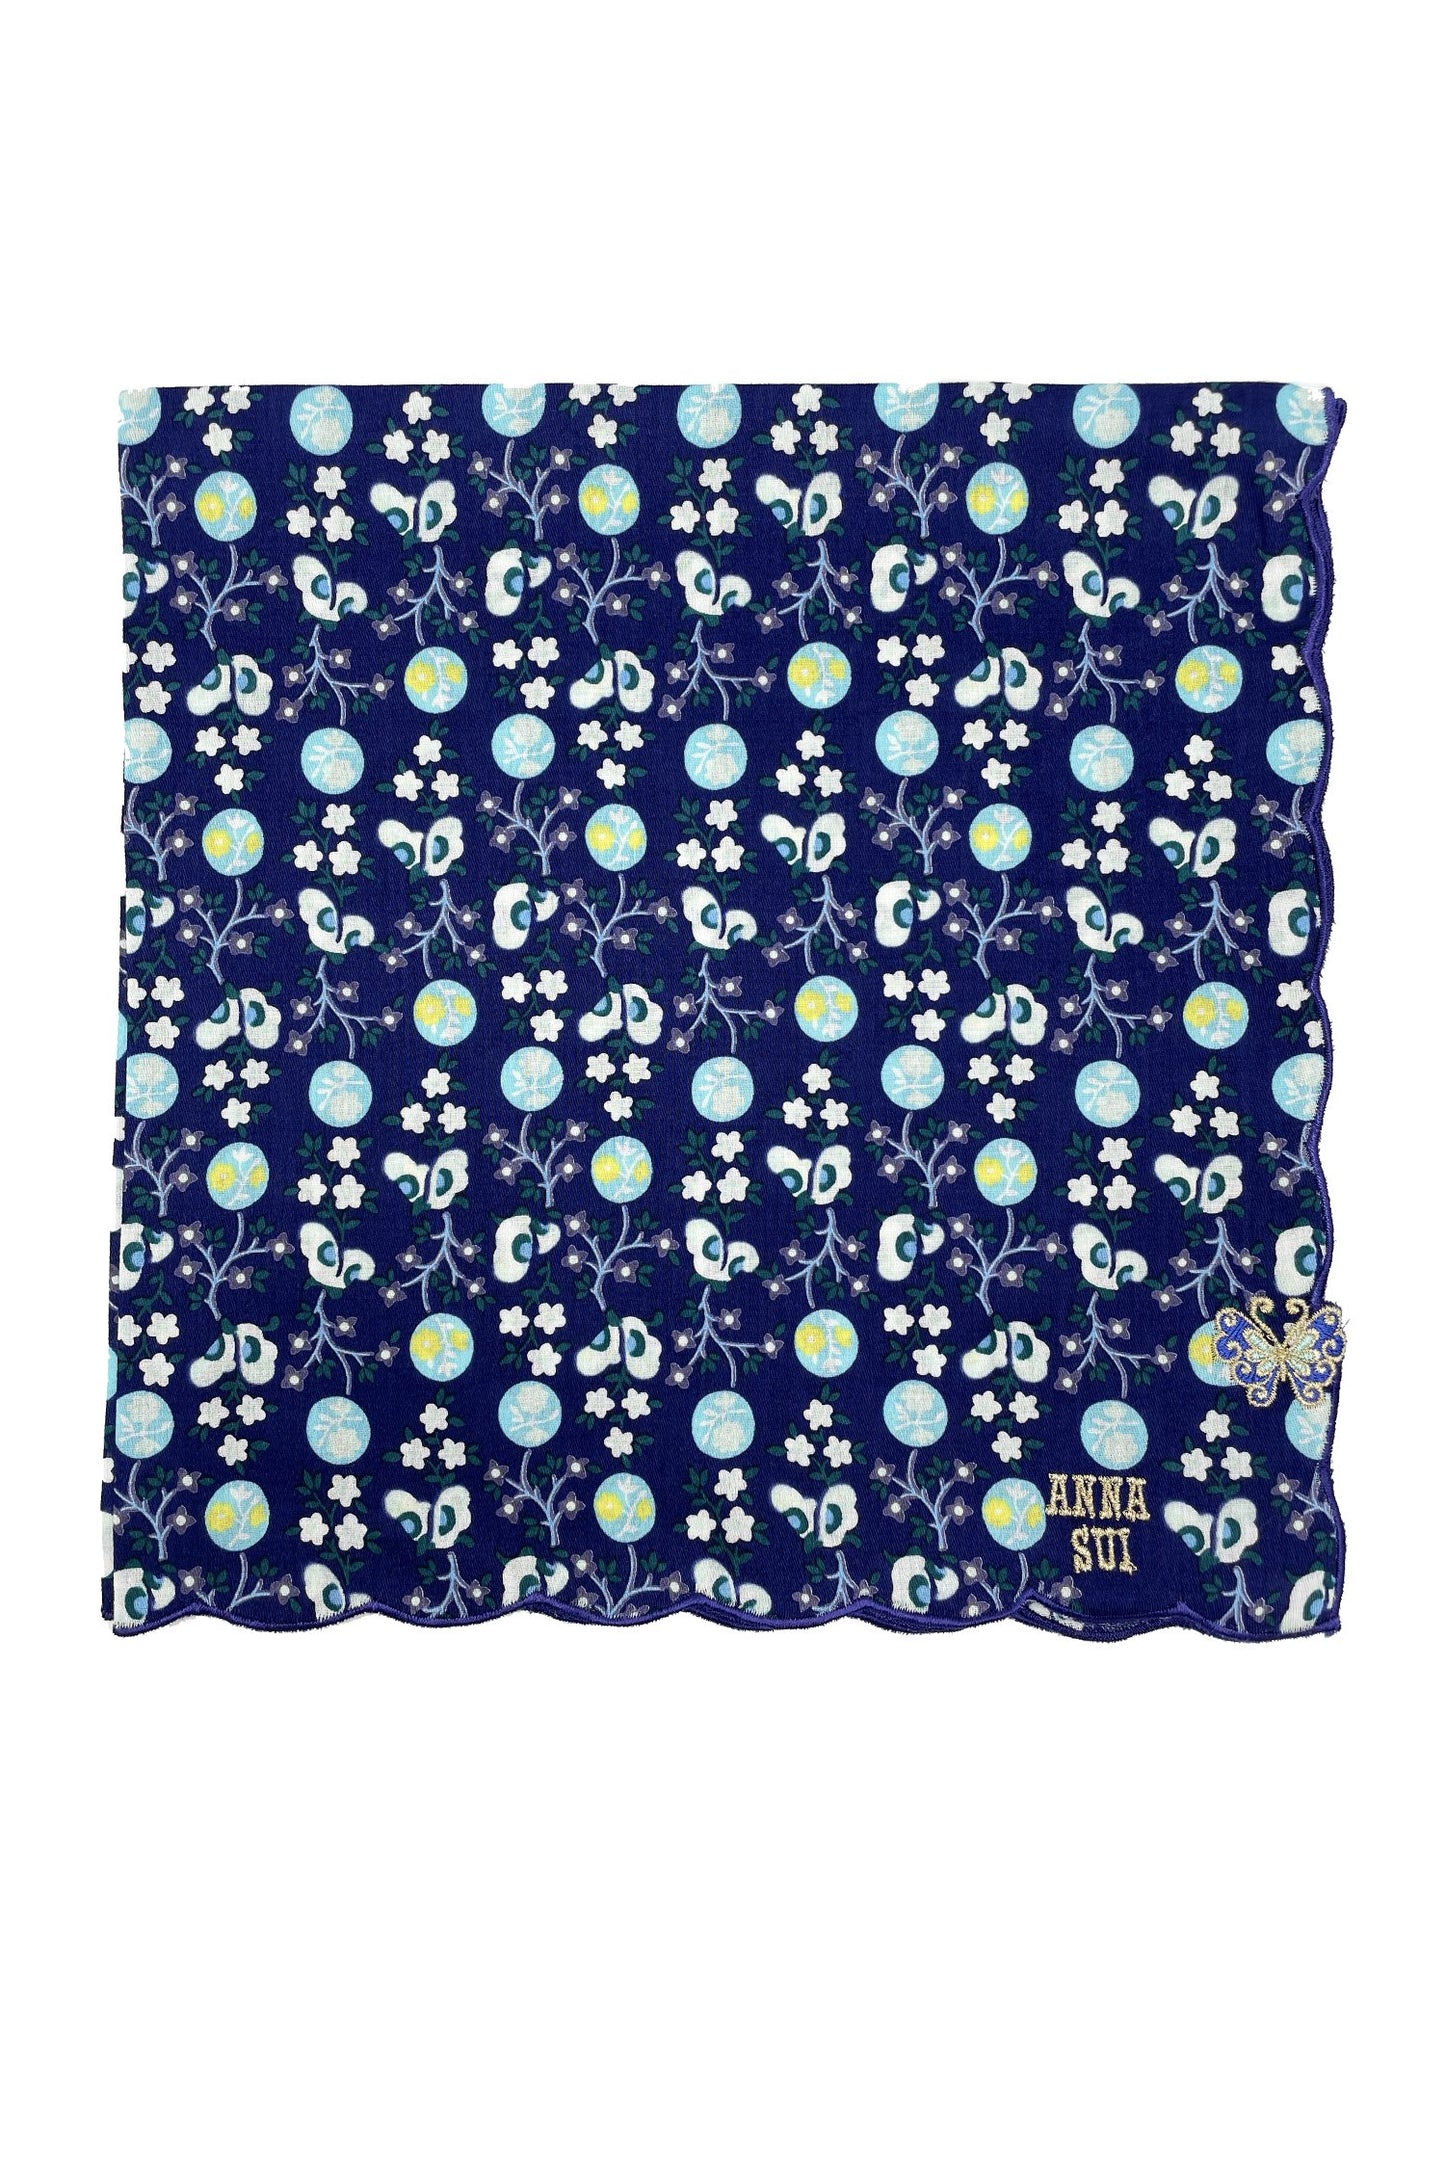 Handkerchief blue with repetitive pattern of white butterflies, and blue/white floral, Anna’s label 